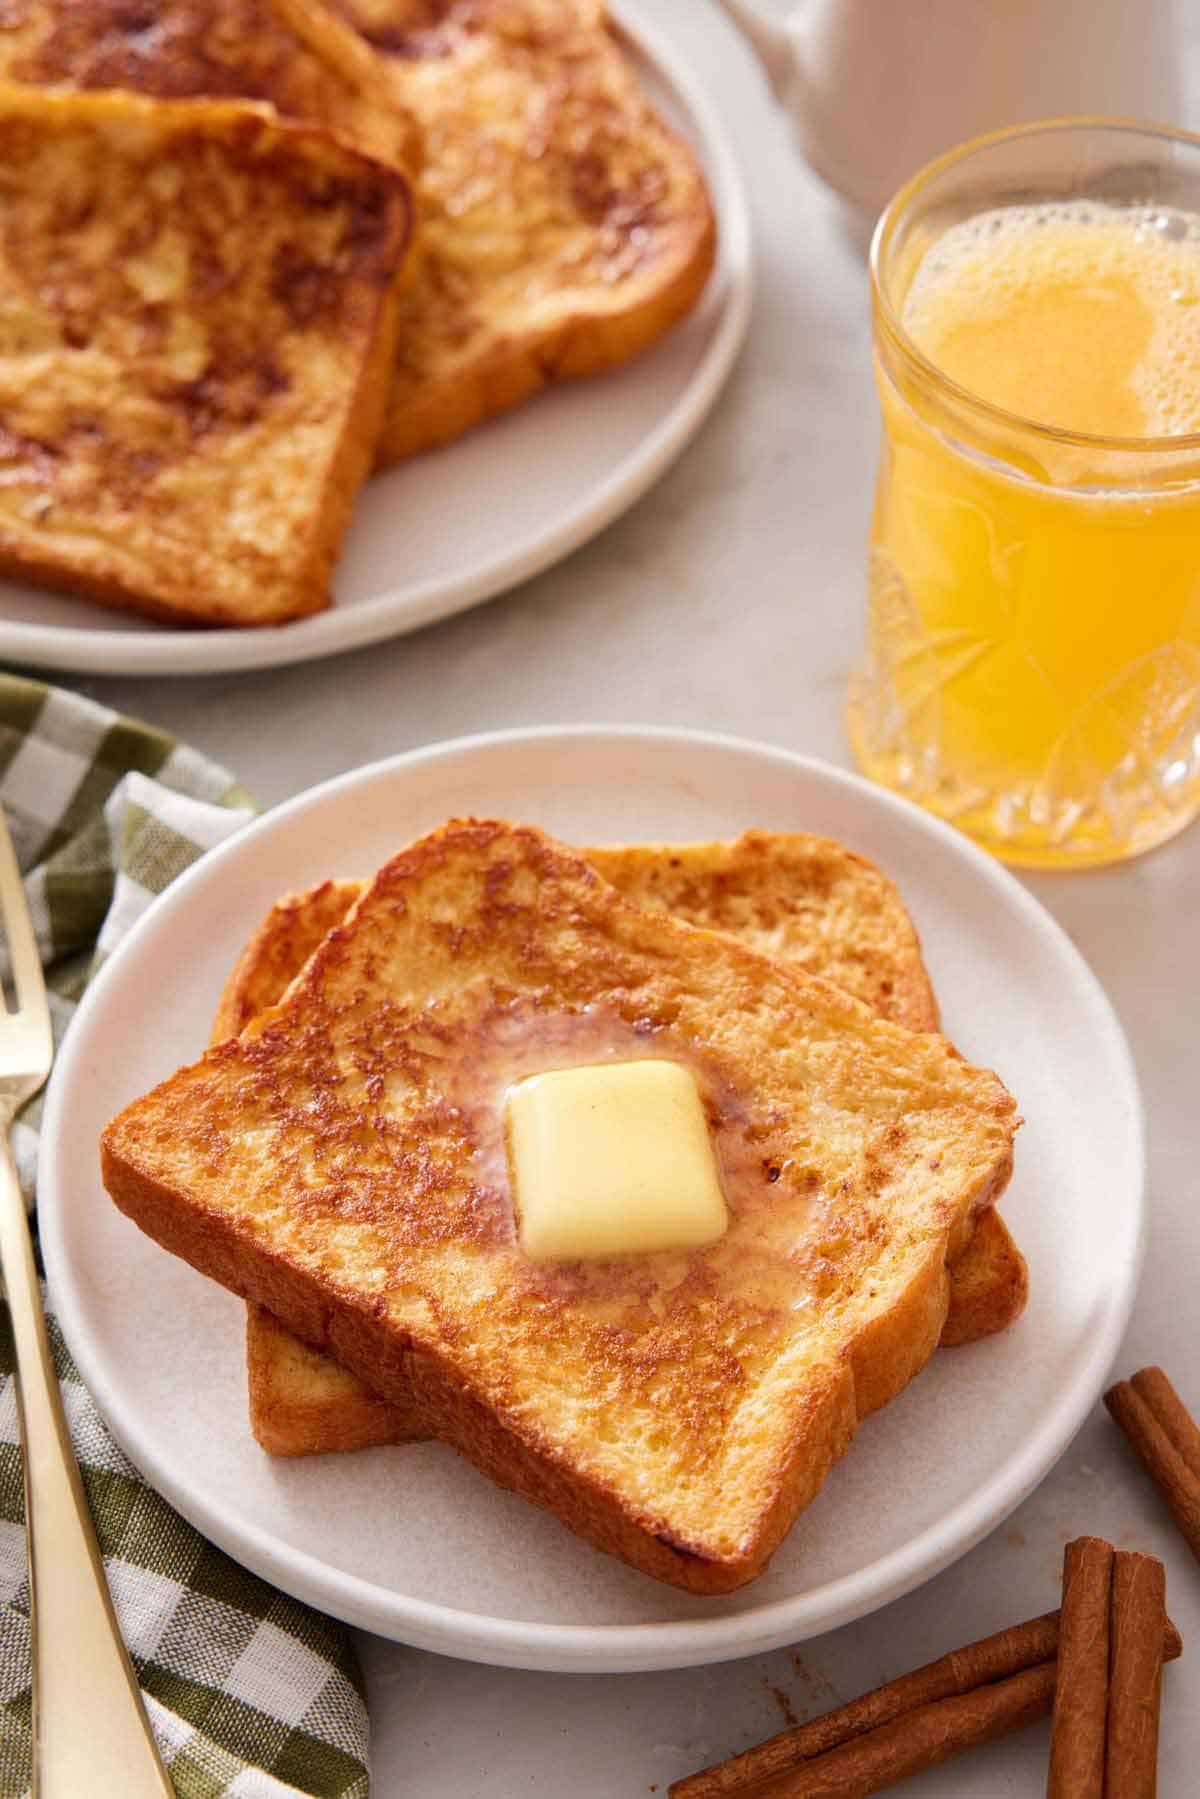 A plate with two pieces of french toast with a knob of butter on top. Orange juice and more french toast in the background.